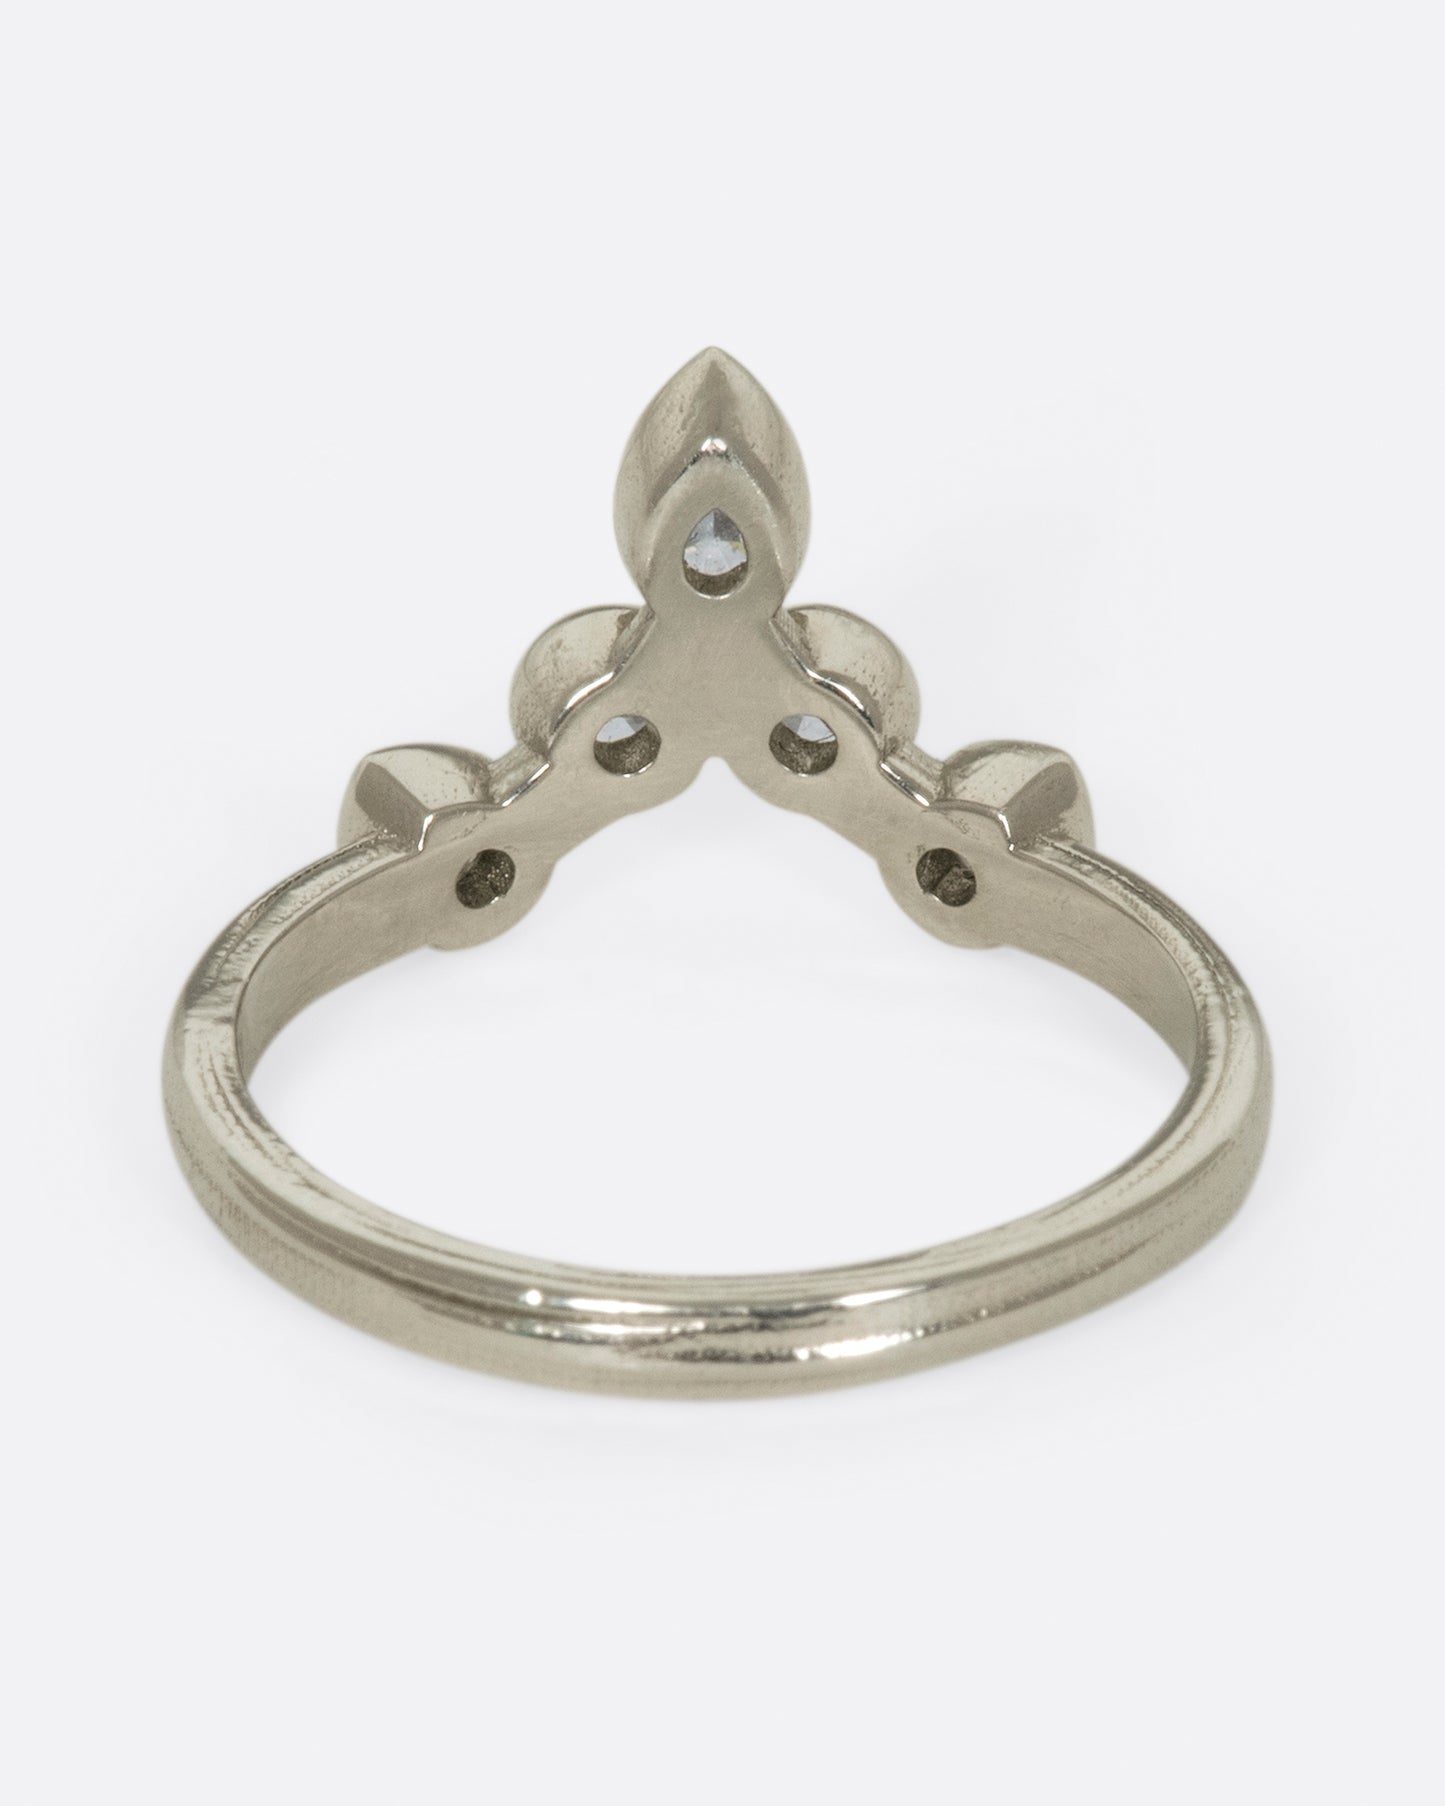 This crowning design can be worn in either direction on the finger, alone, or stacked with another one of Karen's creations - We love it with one of her Invincible Heart rings